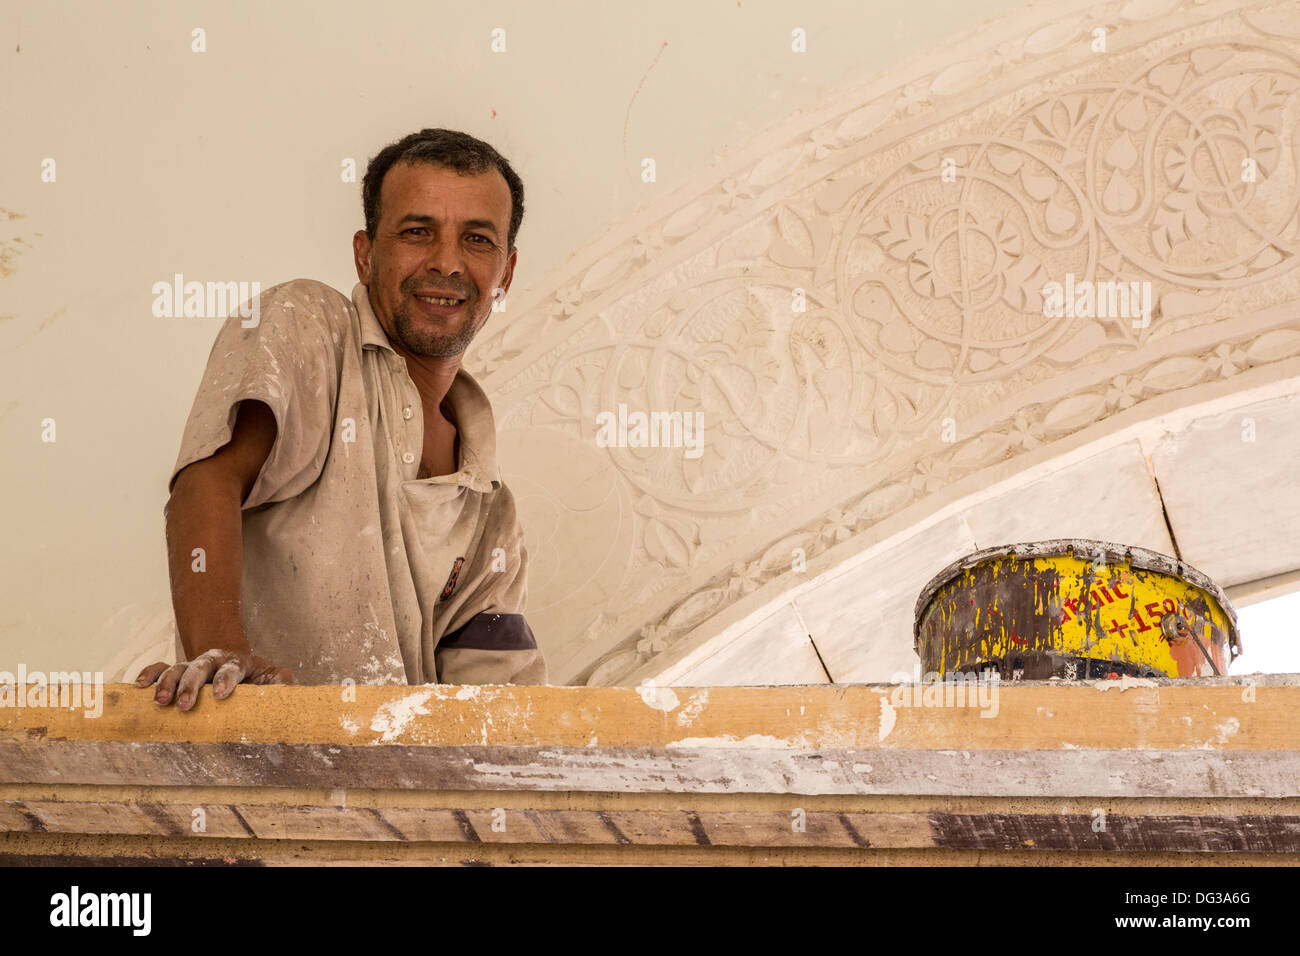 Senegal, Touba. Moroccan Craftsman Taking a Break from Carving a Design into an Arch inside the Grand Mosque. Stock Photo